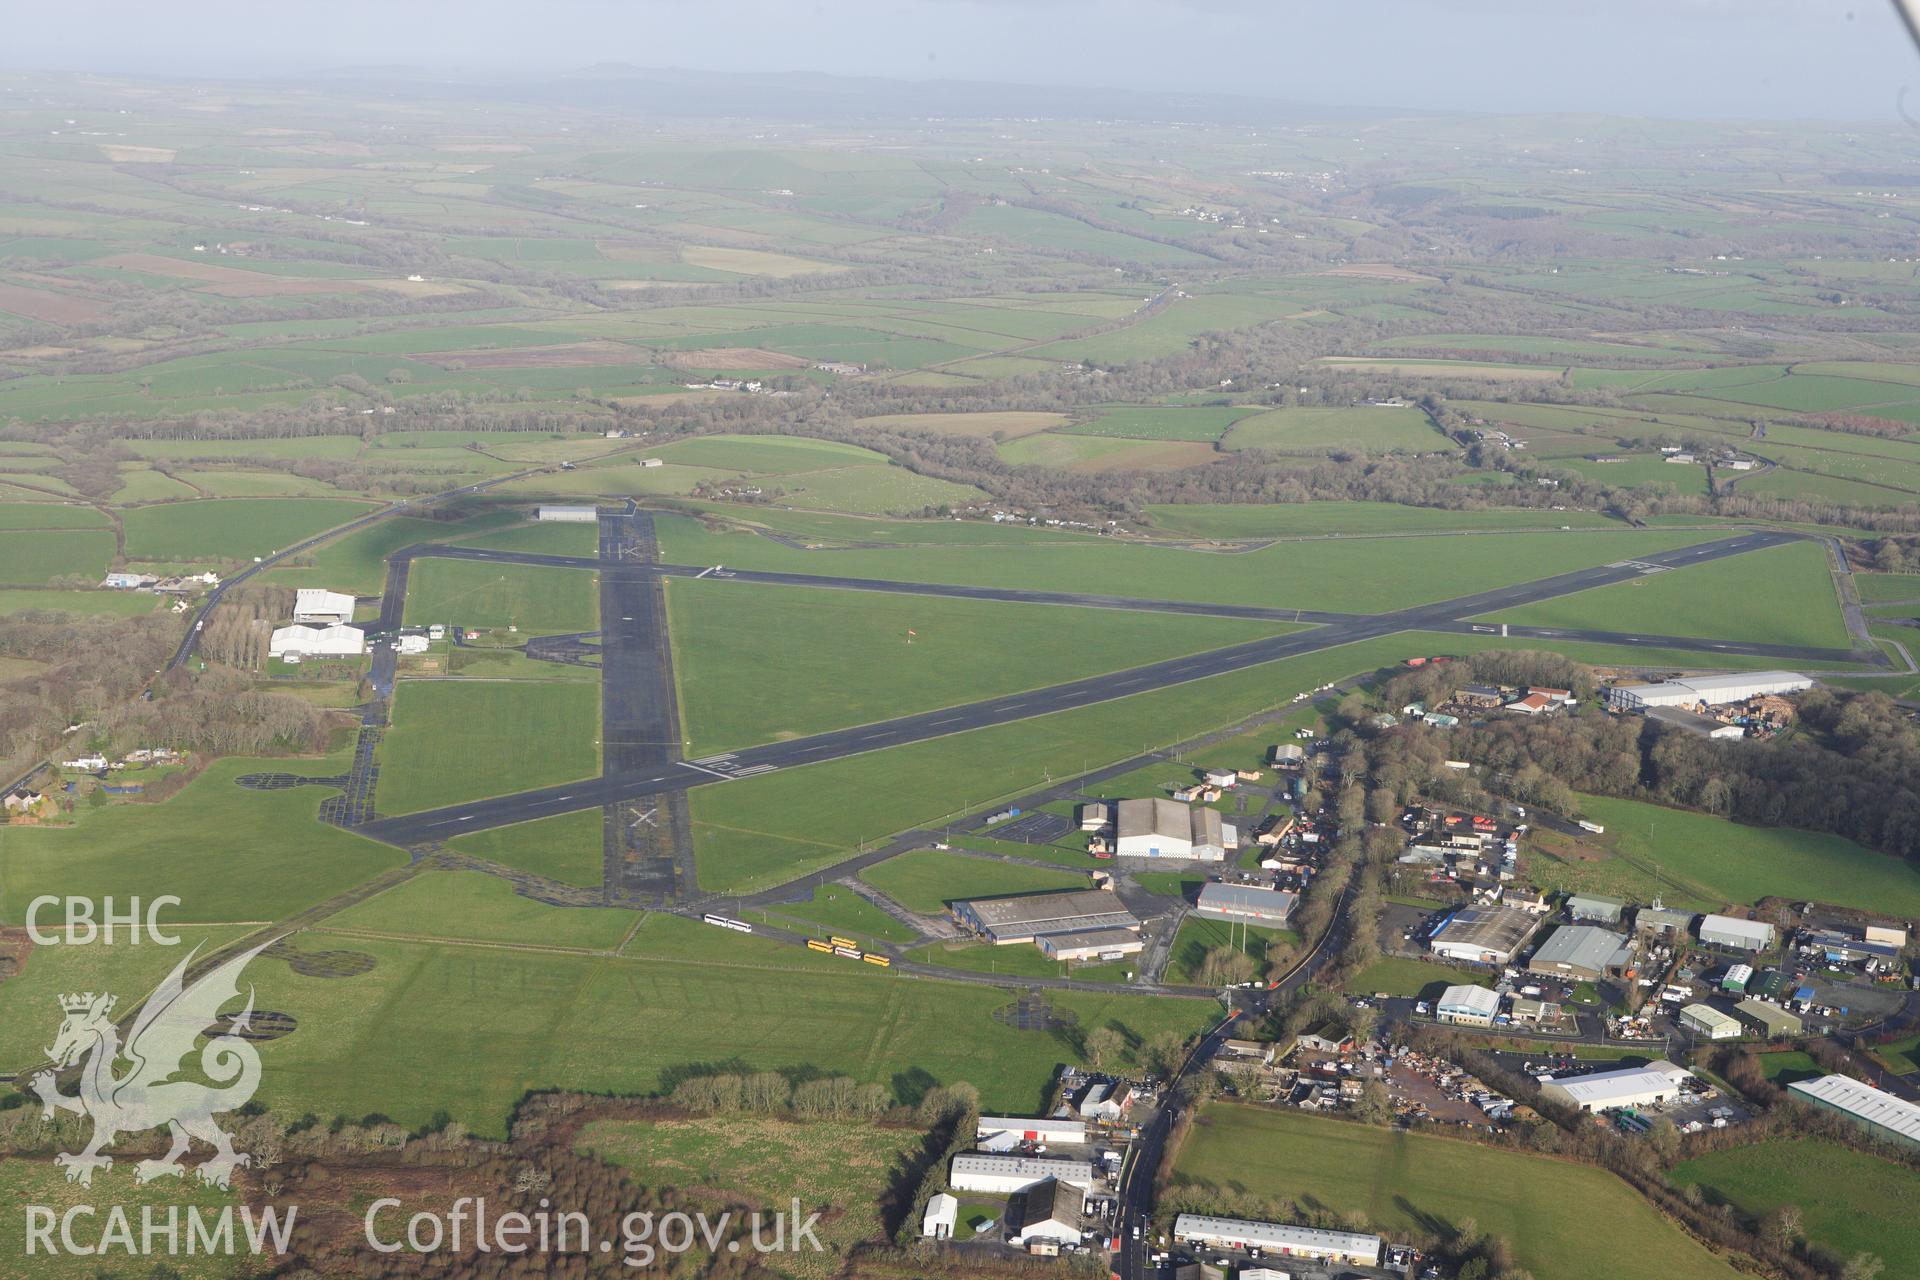 RCAHMW colour oblique photograph of Haverfordwest Airfield. Taken by Toby Driver on 27/01/2012.